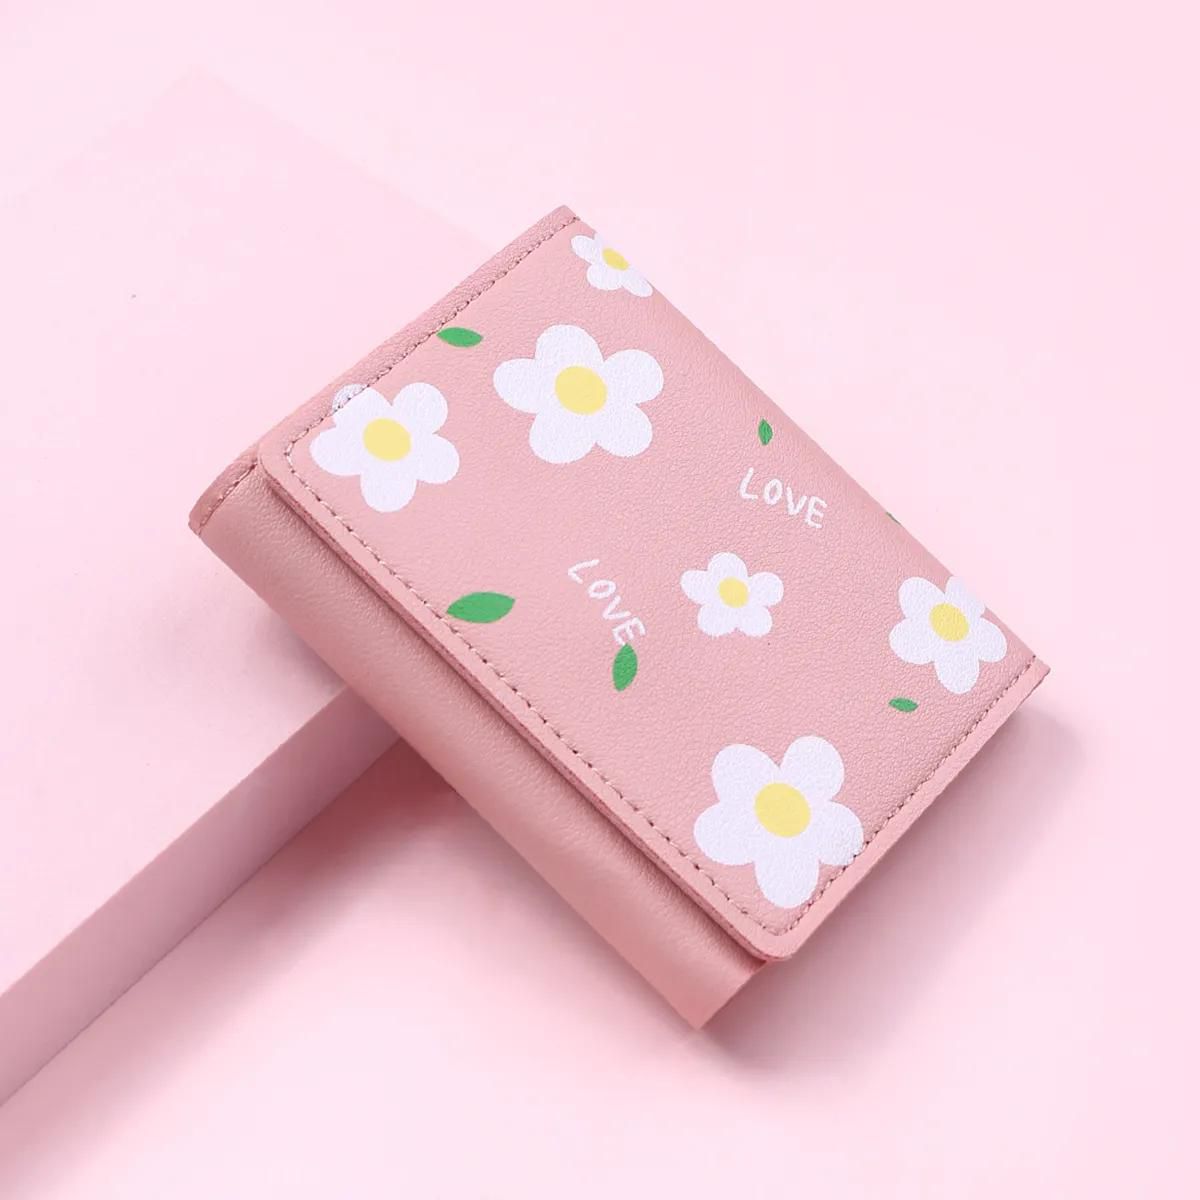 Cute Flower Women Wallet Hasp Brand Designed PU Leather Small Girl Coin Purse Female Credit Card Holder Bag